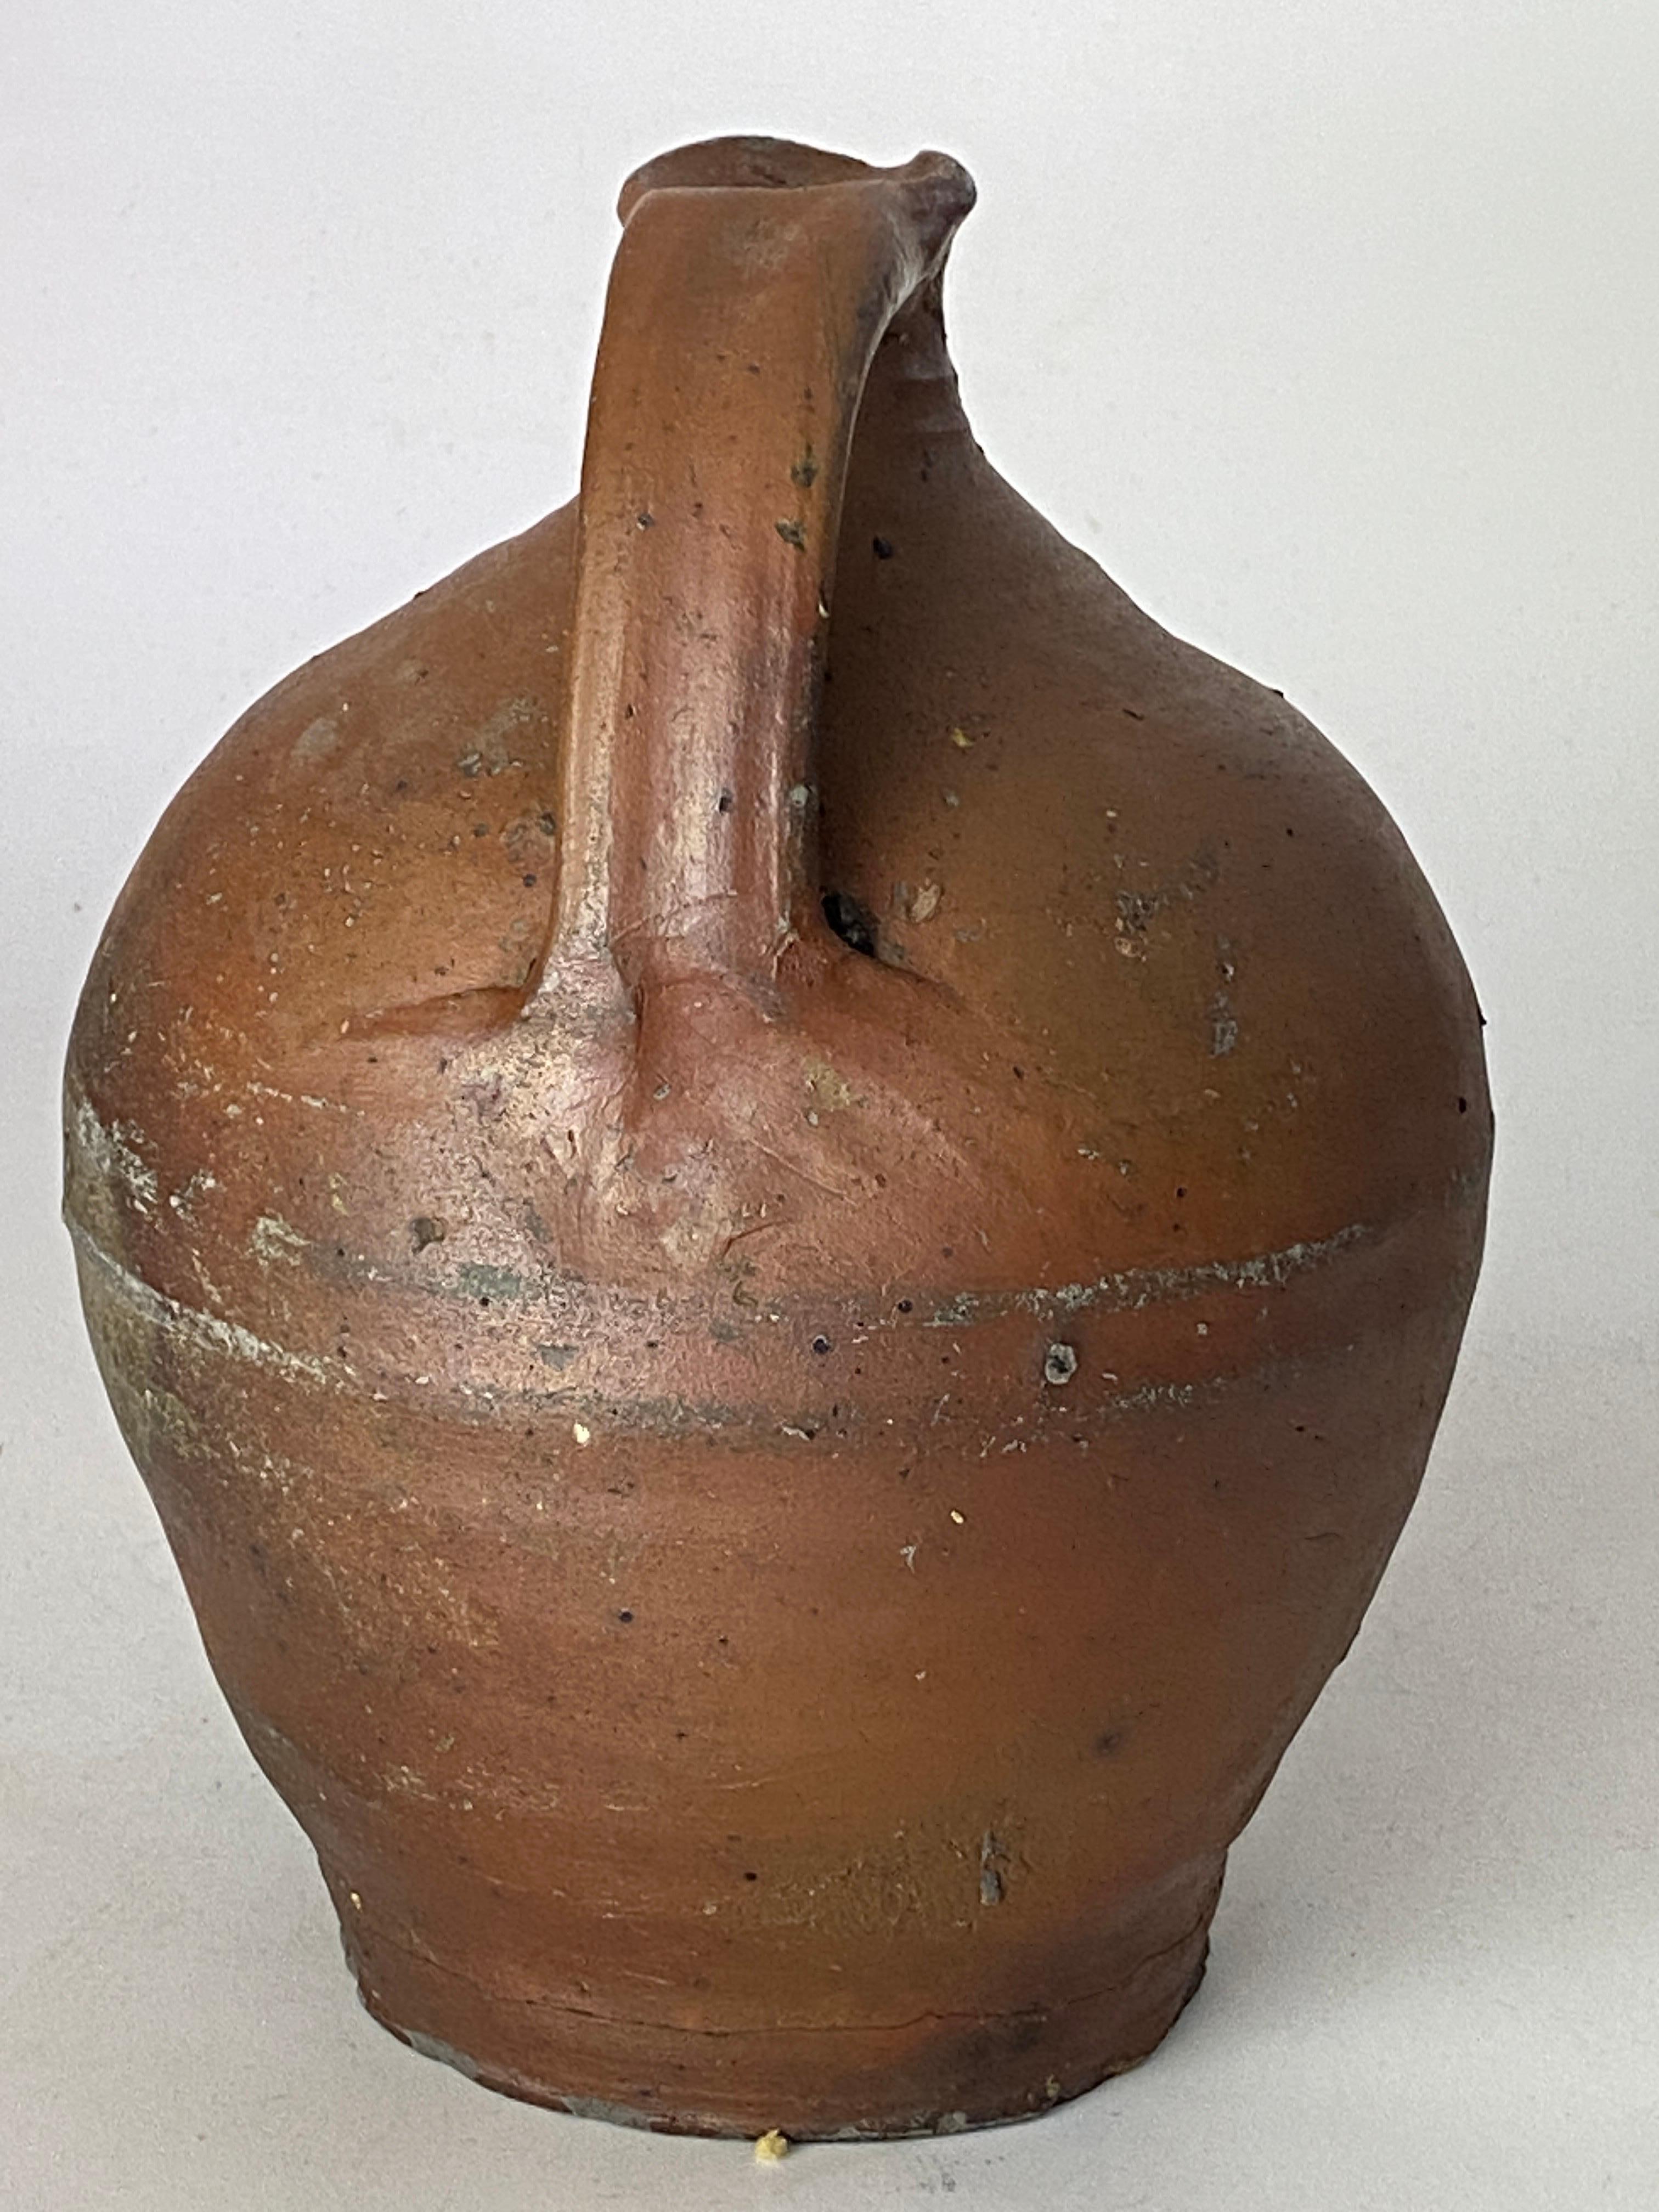 Japanese Stoneware Pottery Jug Pitcher with Amazing Glaze circa 19th Rustic In Good Condition For Sale In Auribeau sur Siagne, FR